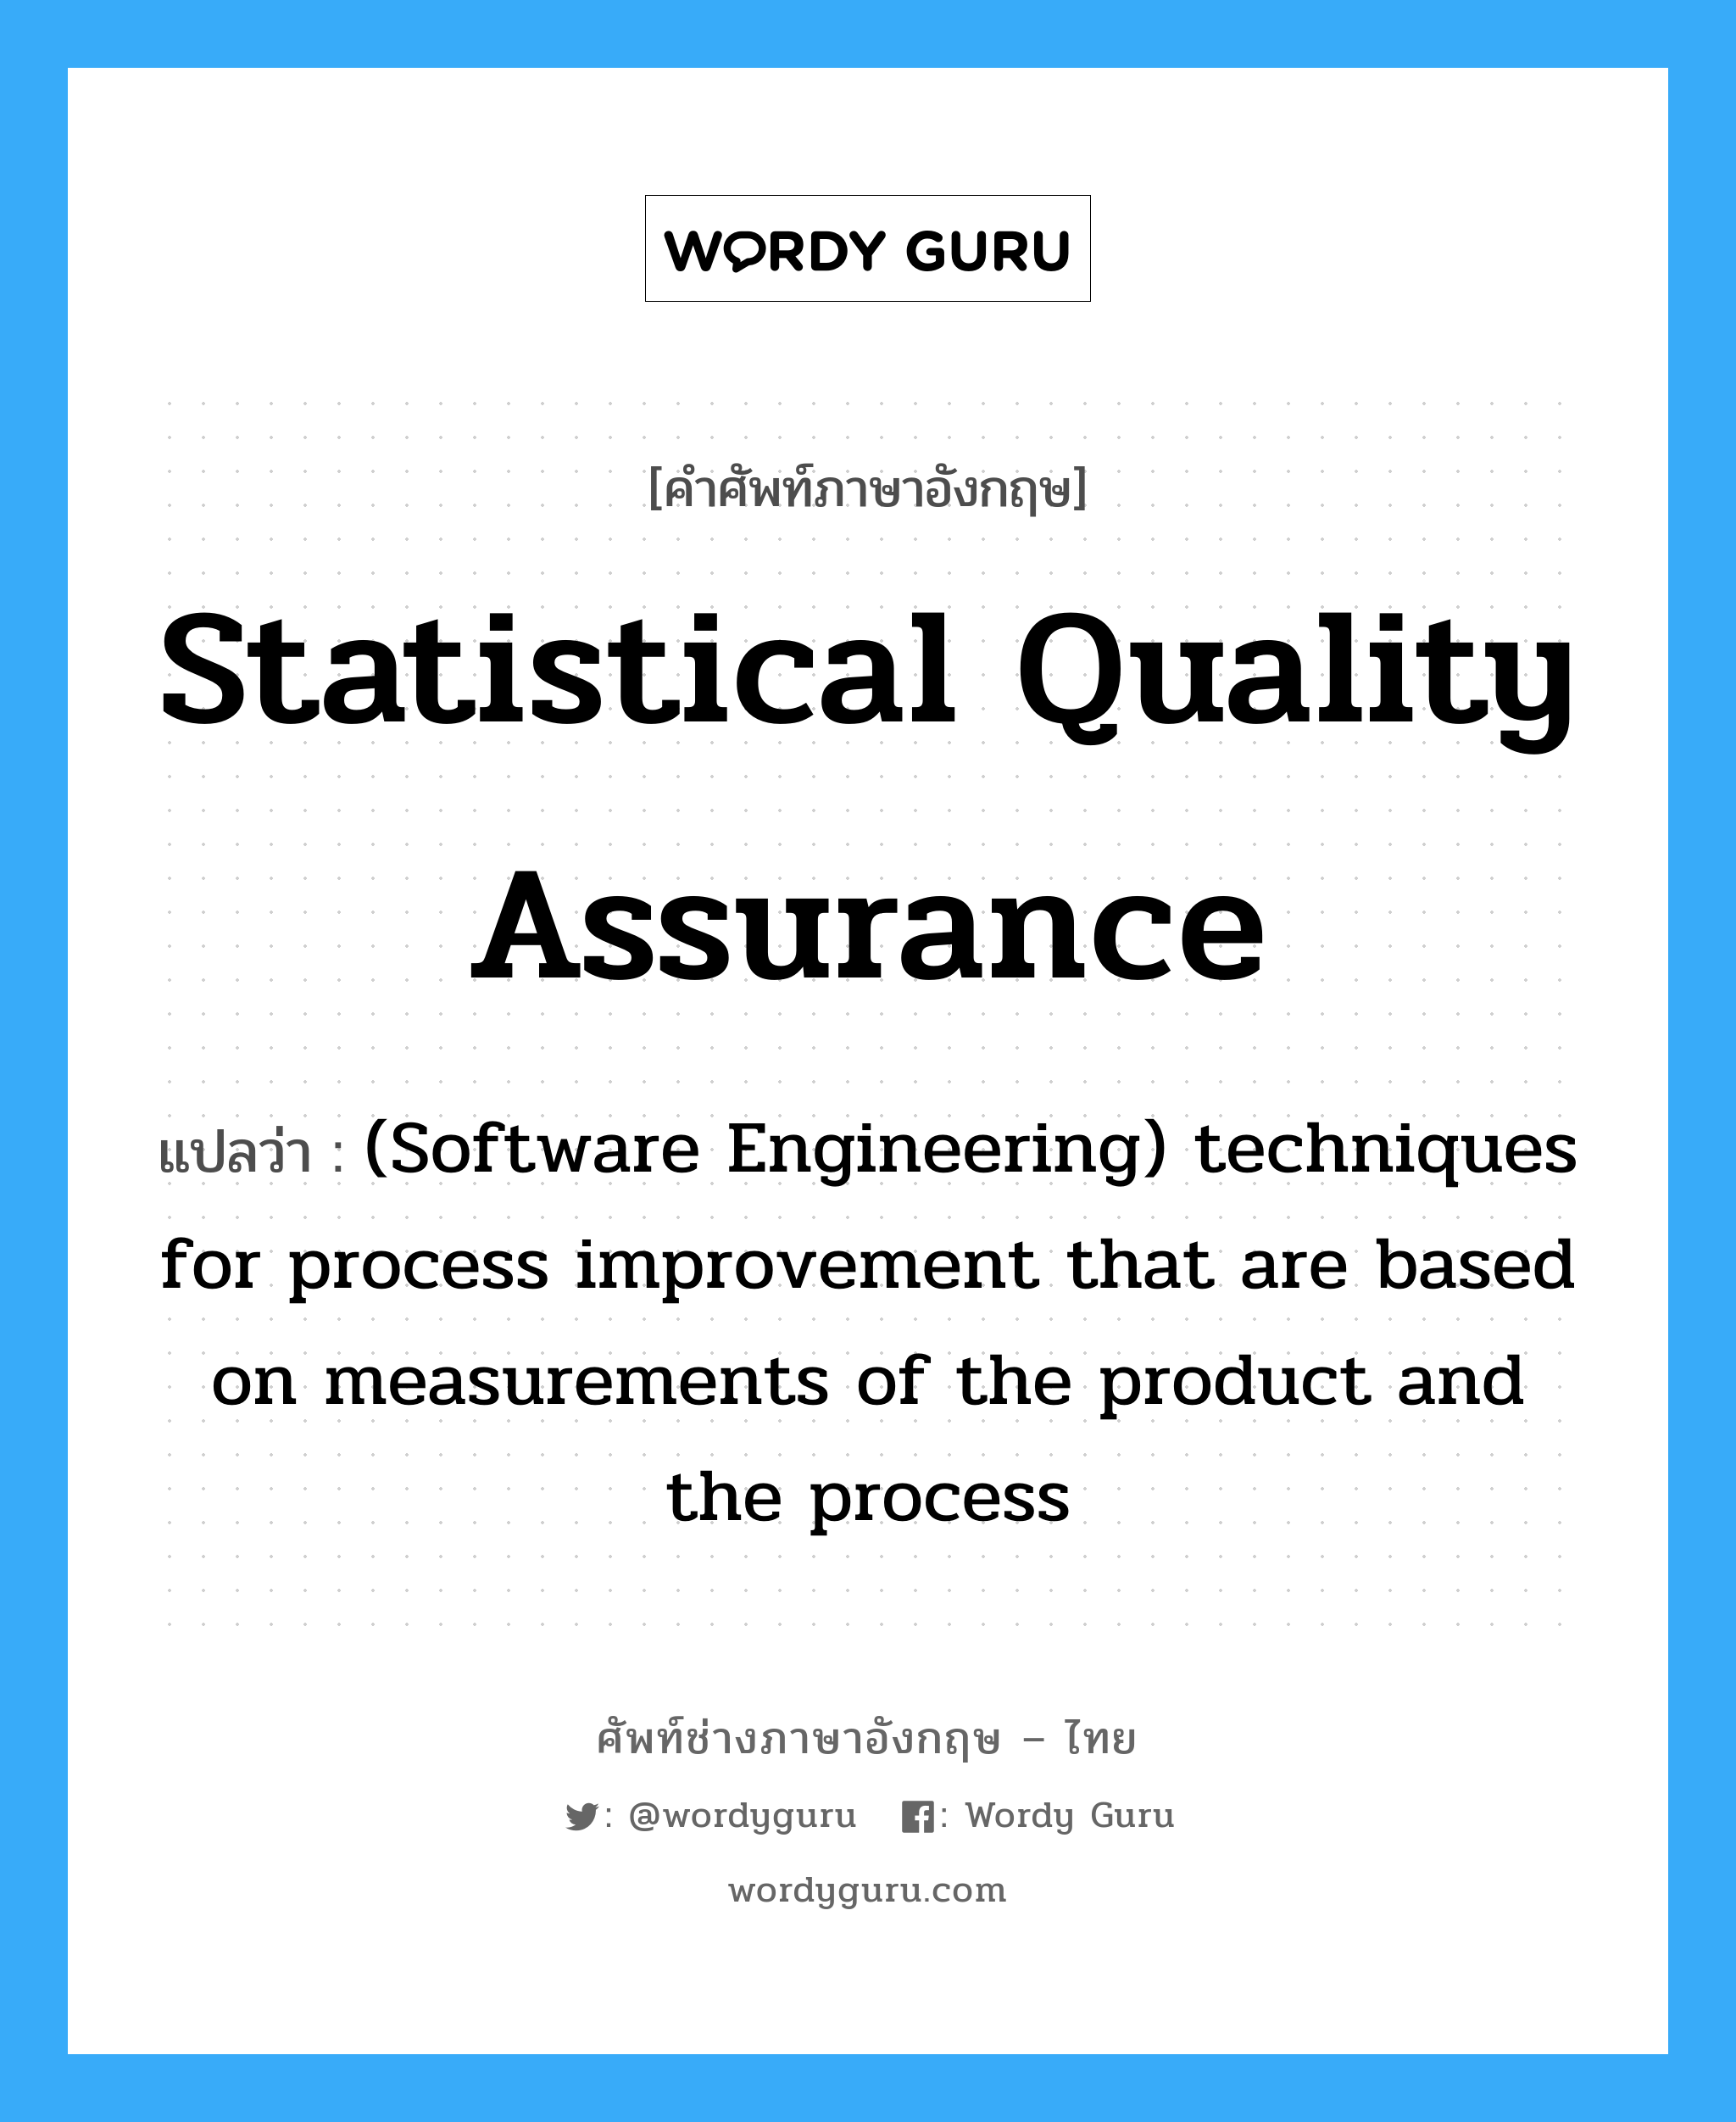 Statistical quality assurance แปลว่า?, คำศัพท์ช่างภาษาอังกฤษ - ไทย Statistical quality assurance คำศัพท์ภาษาอังกฤษ Statistical quality assurance แปลว่า (Software Engineering) techniques for process improvement that are based on measurements of the product and the process